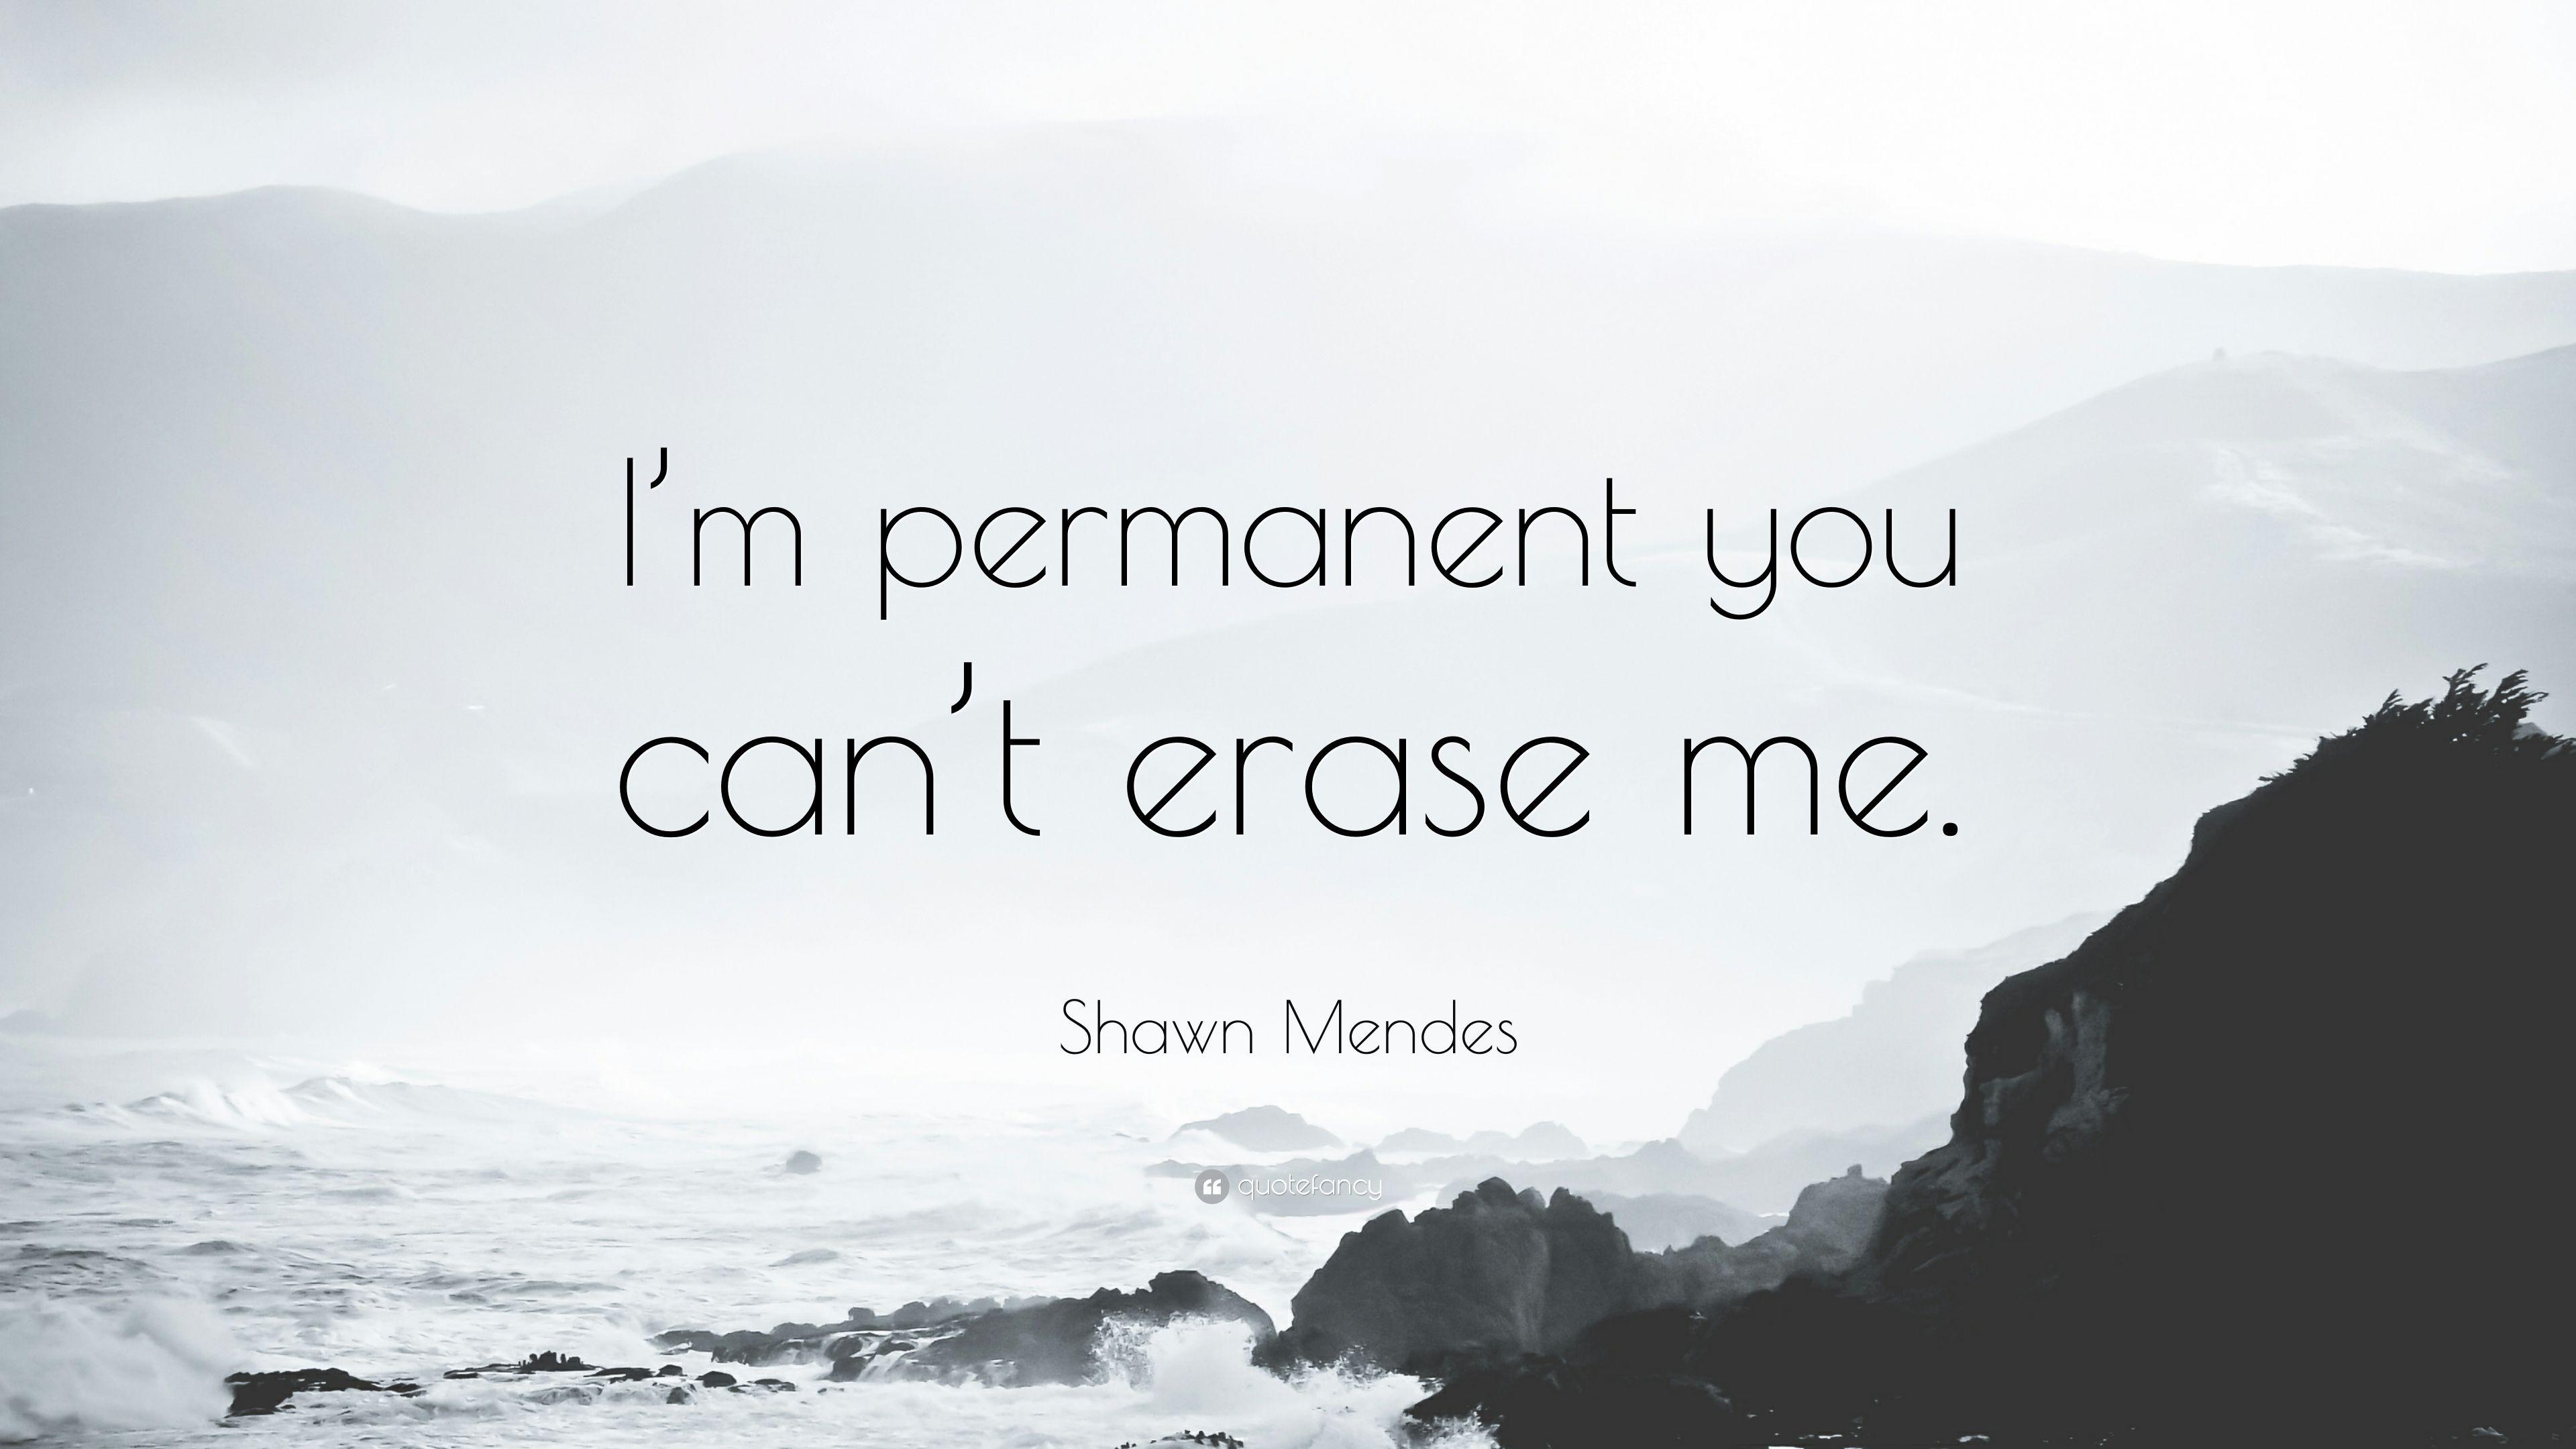 Pin by Mr Mendes Wallpapers on Shawn Mendes Wallpapers  Shawn mendes  quotes, Shawn mendes funny, Shawn mendes lyrics